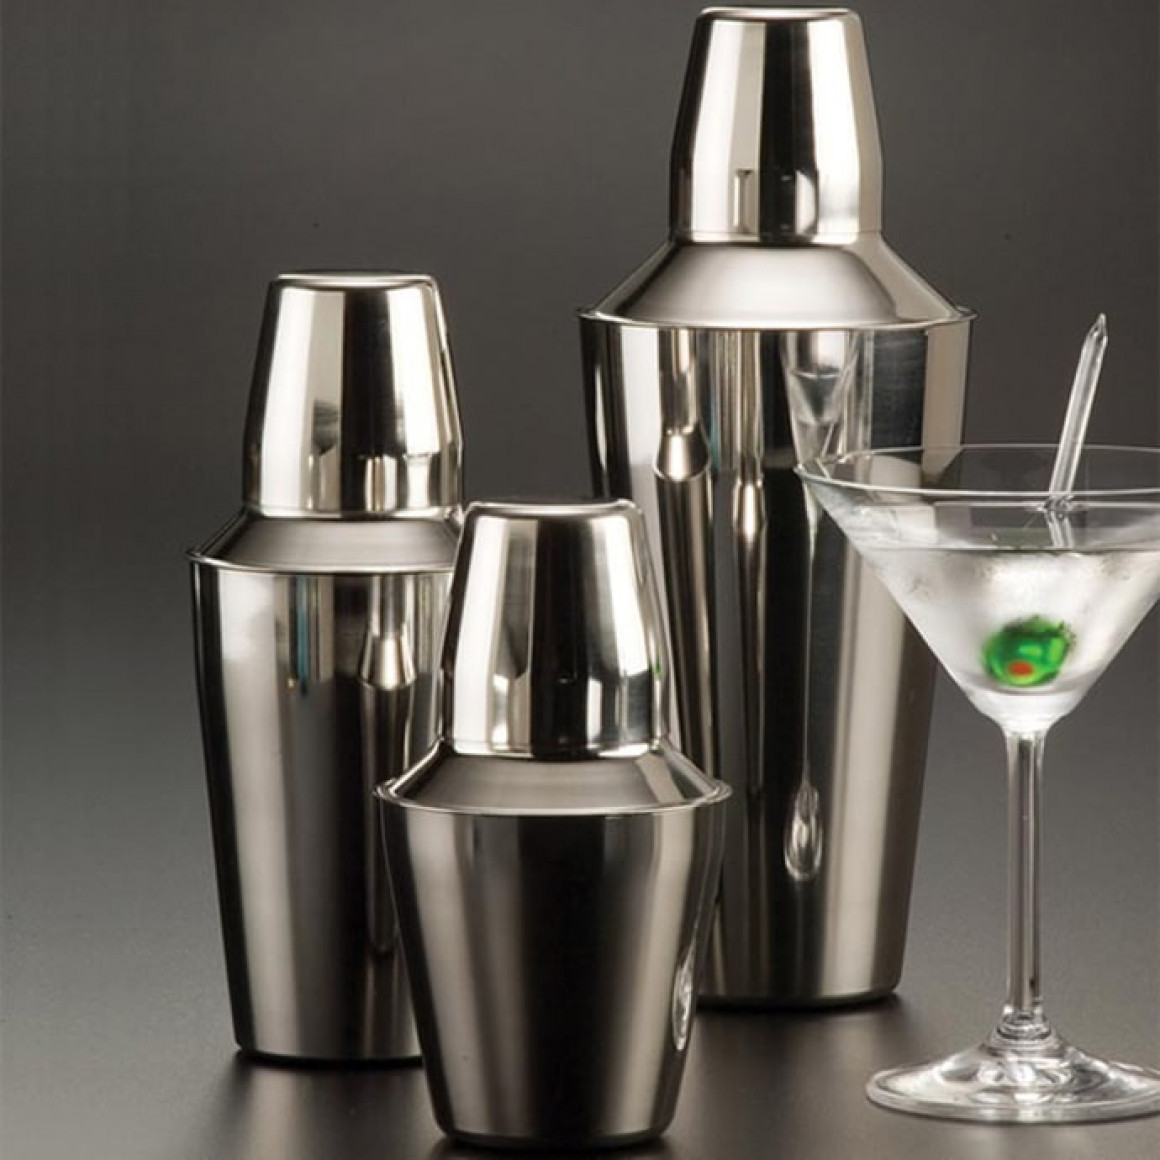 COCKTAIL SHAKER, STAINLESS STEEL, THREE-PIECE, 28 OZ.